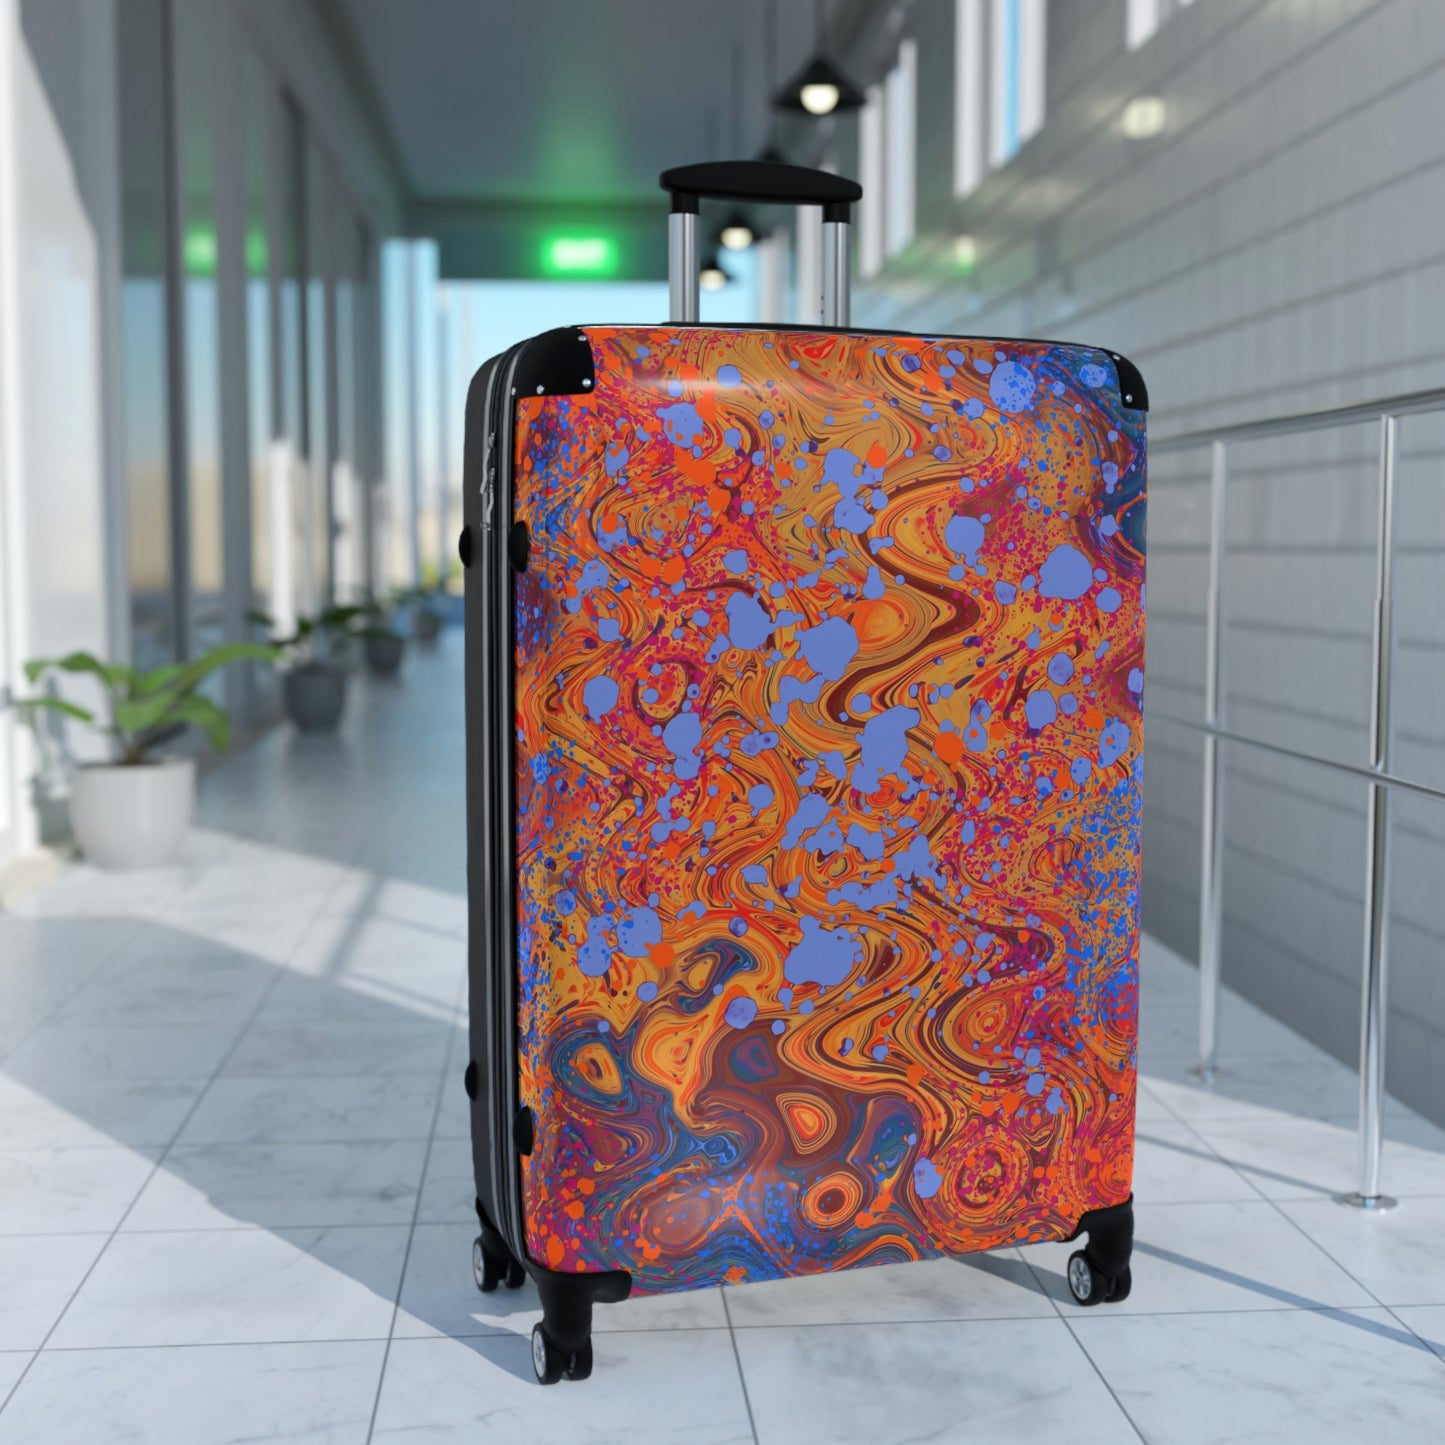 Hard Shell Suitcases - Red Swirls